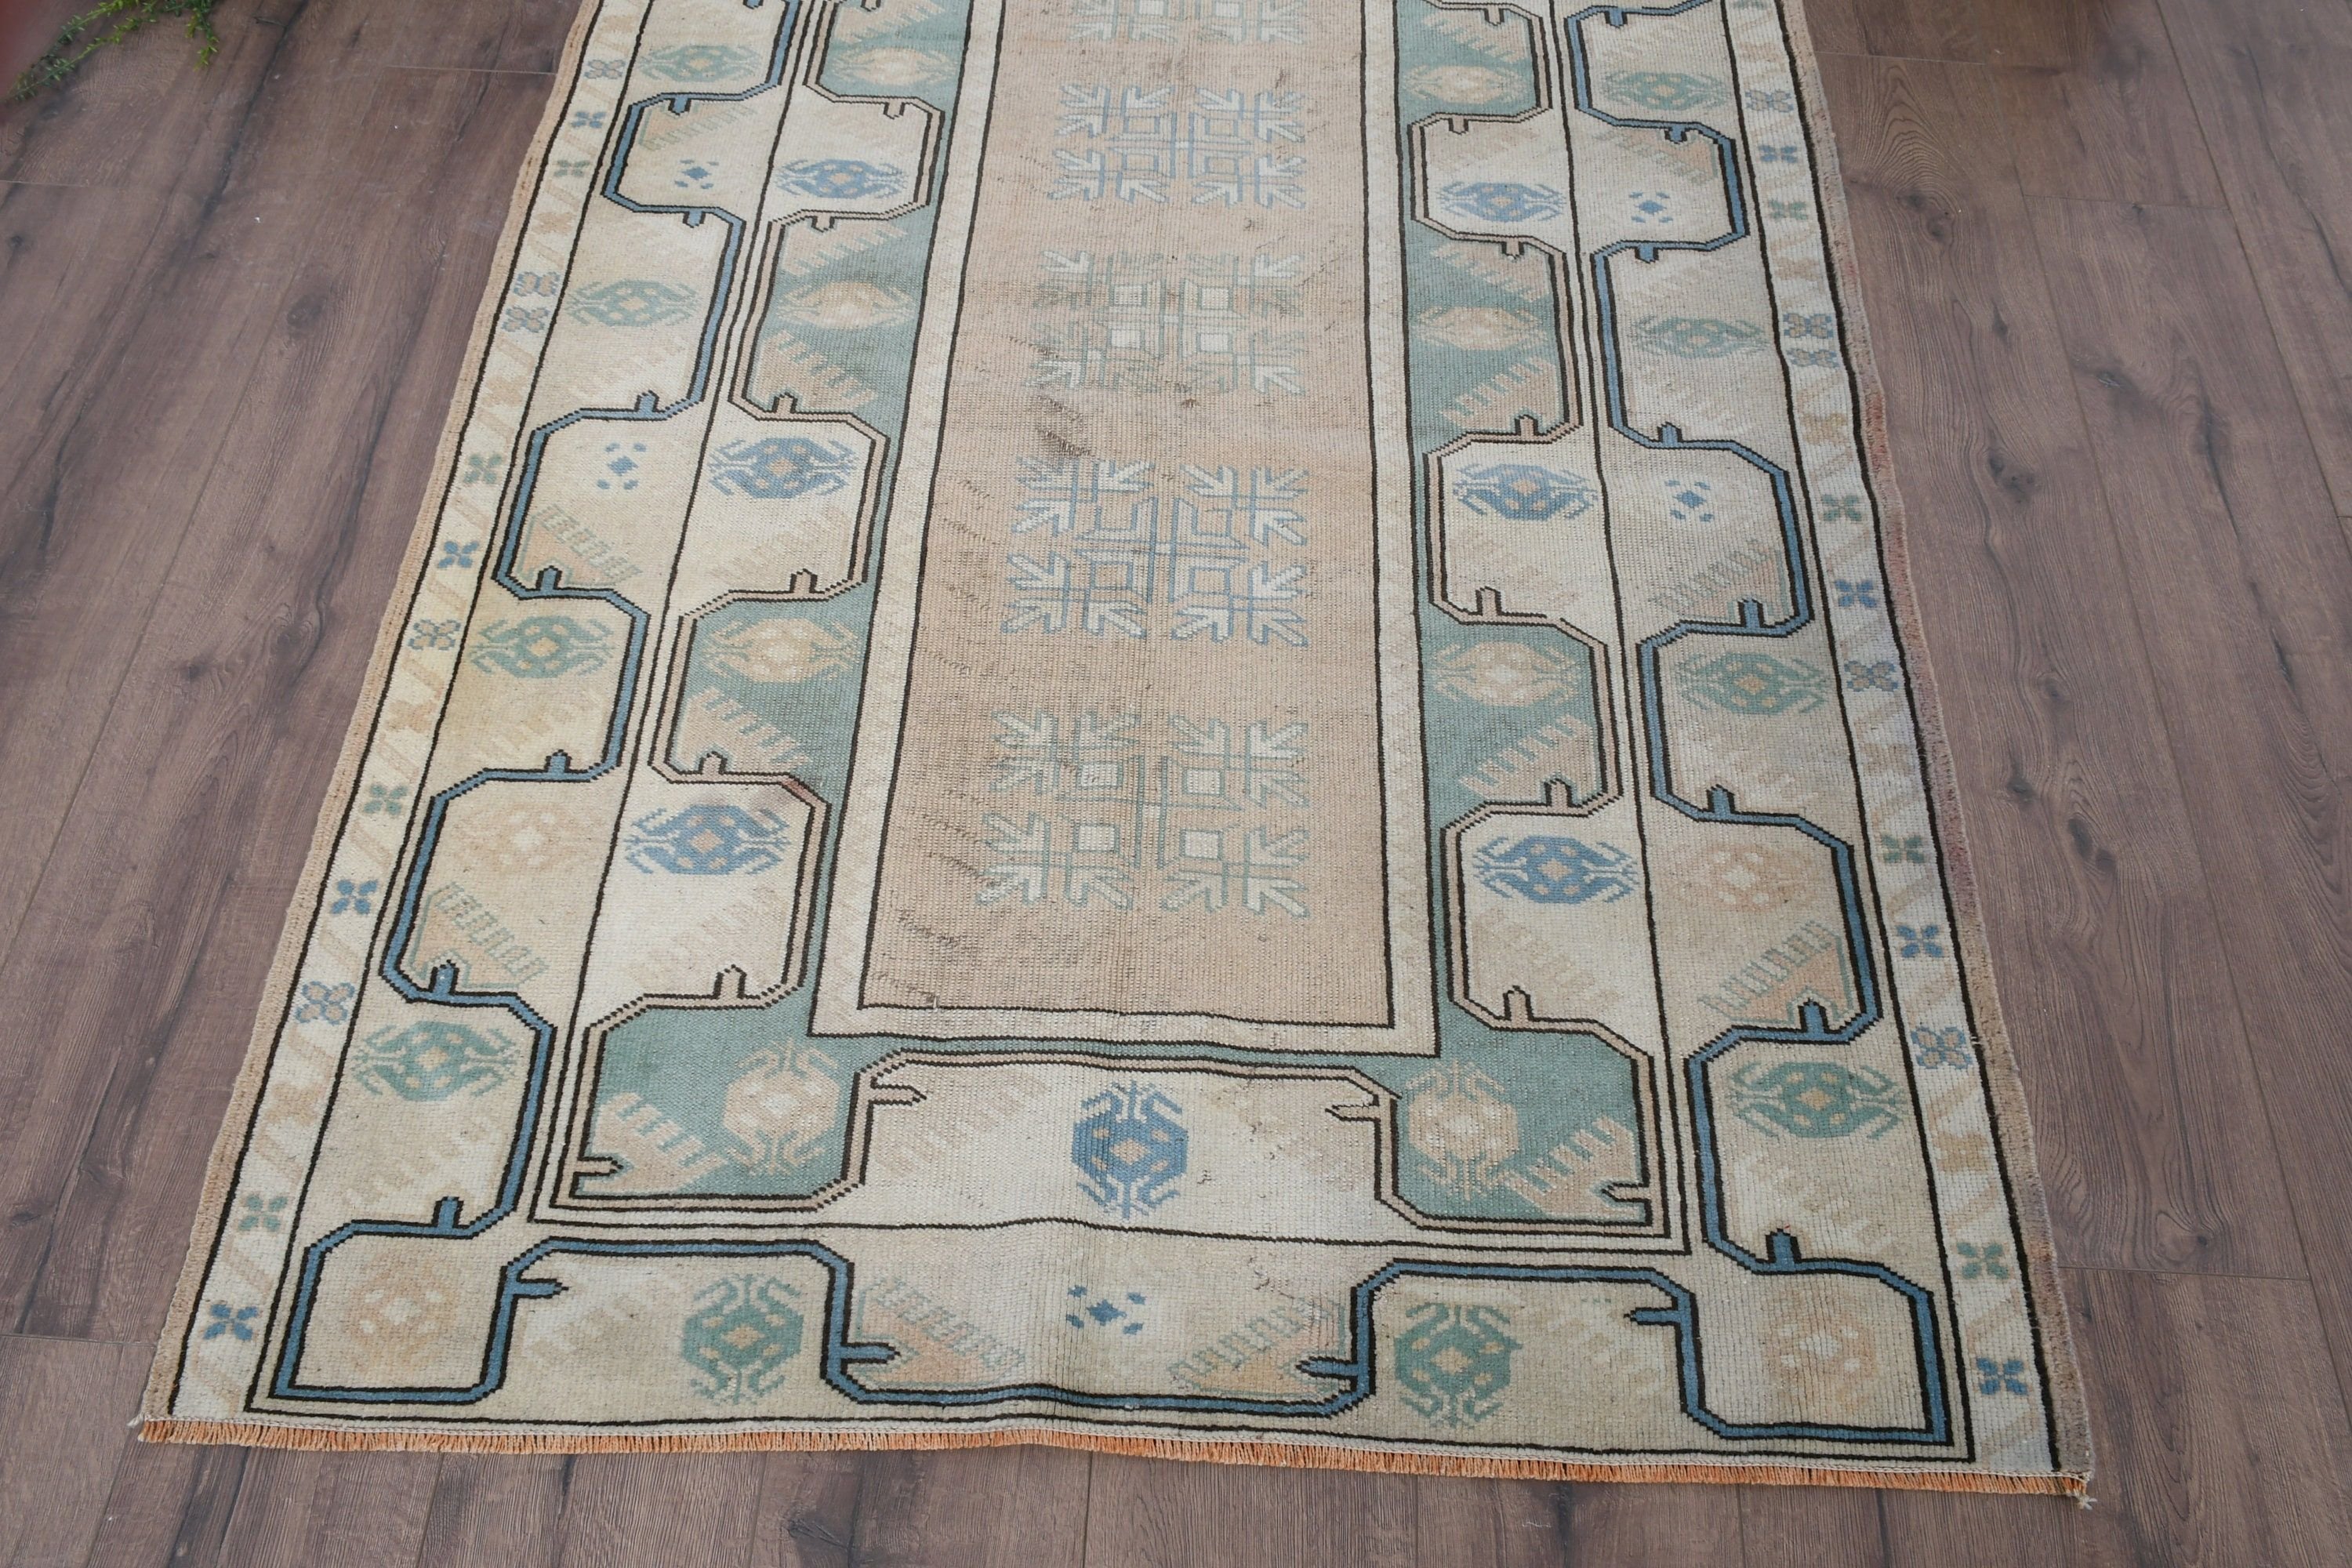 Vintage Rug, Entry Rug, Antique Rugs, 3.8x6.1 ft Accent Rug, Cool Rug, Nursery Rugs, Turkish Rug, Rugs for Kitchen, Beige Antique Rugs